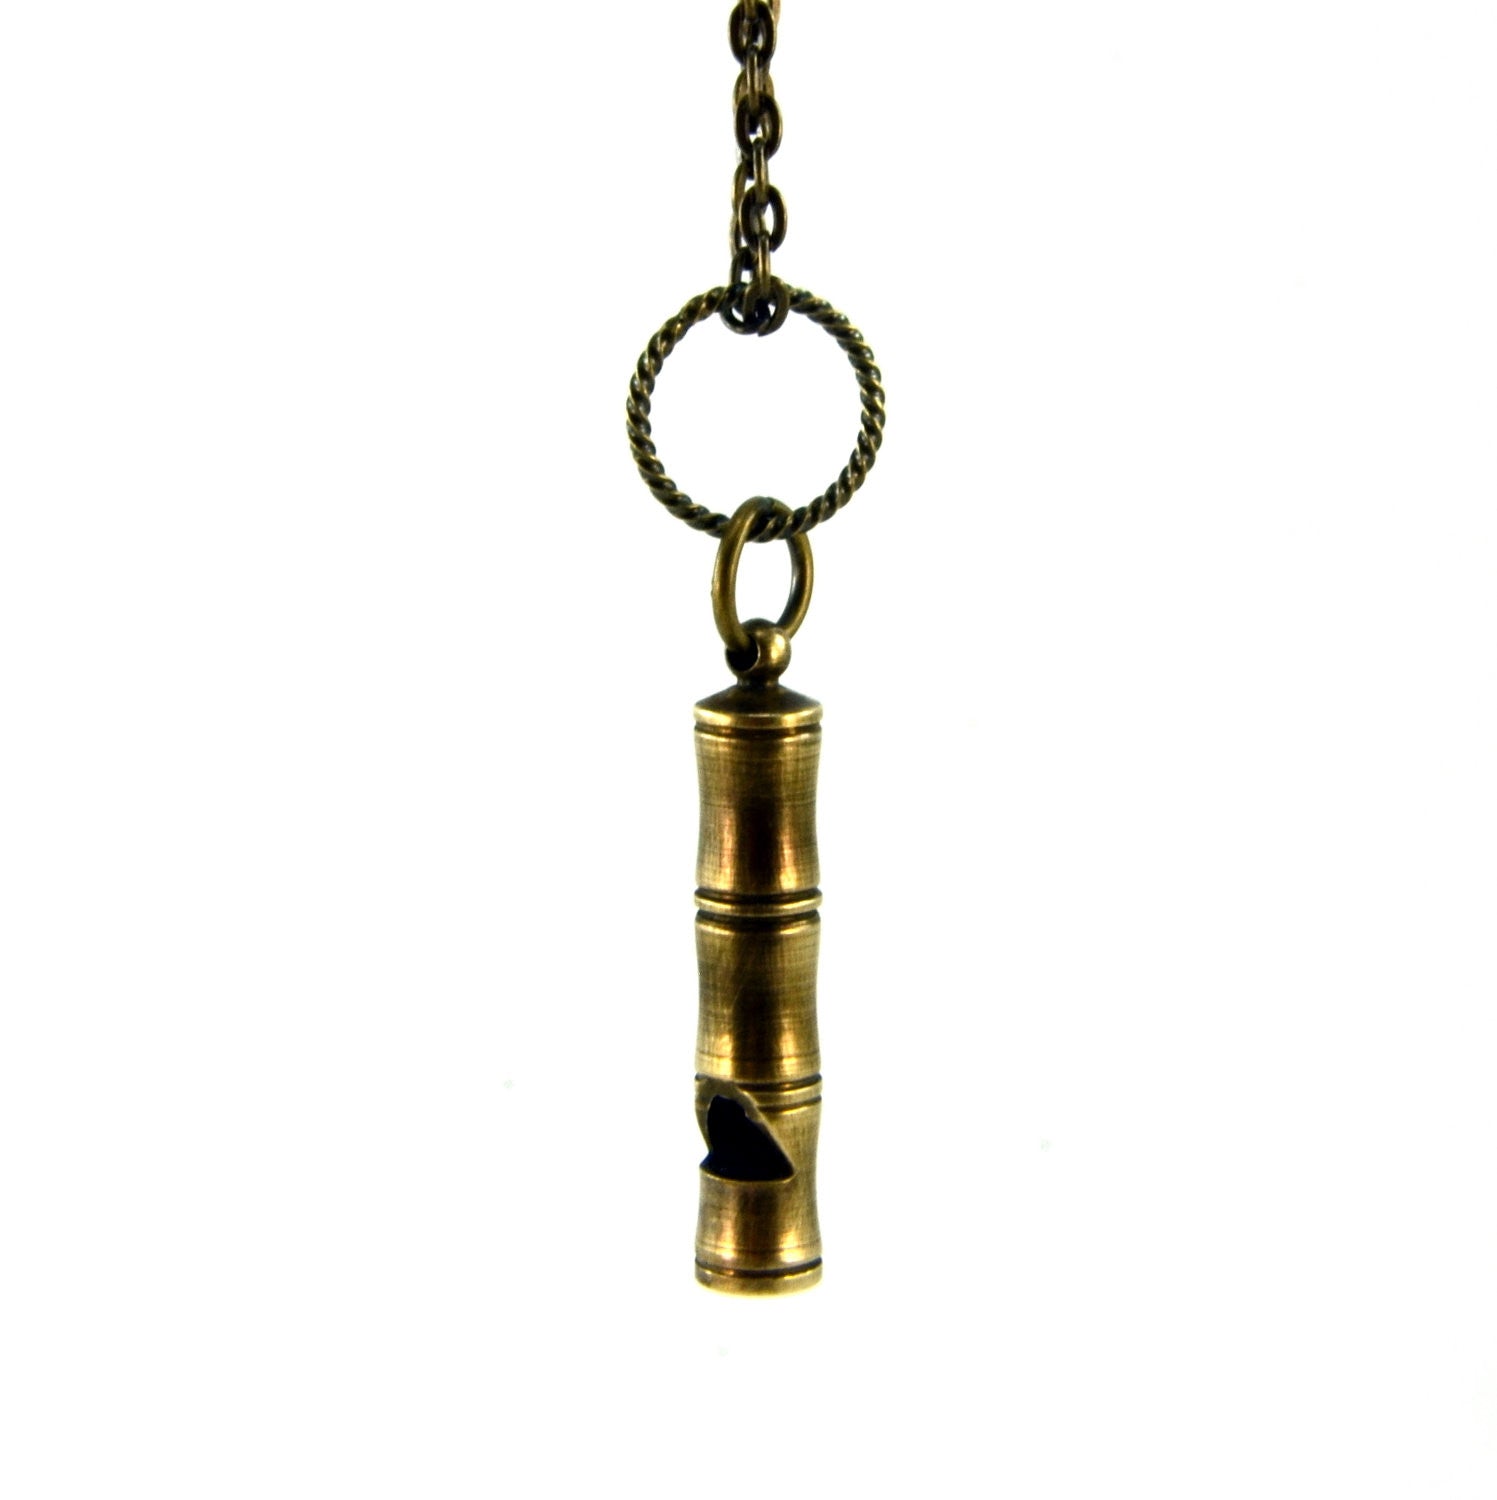 Miniature Bamboo Whistle Pendant Necklace - Gwen Delicious Jewelry Designs